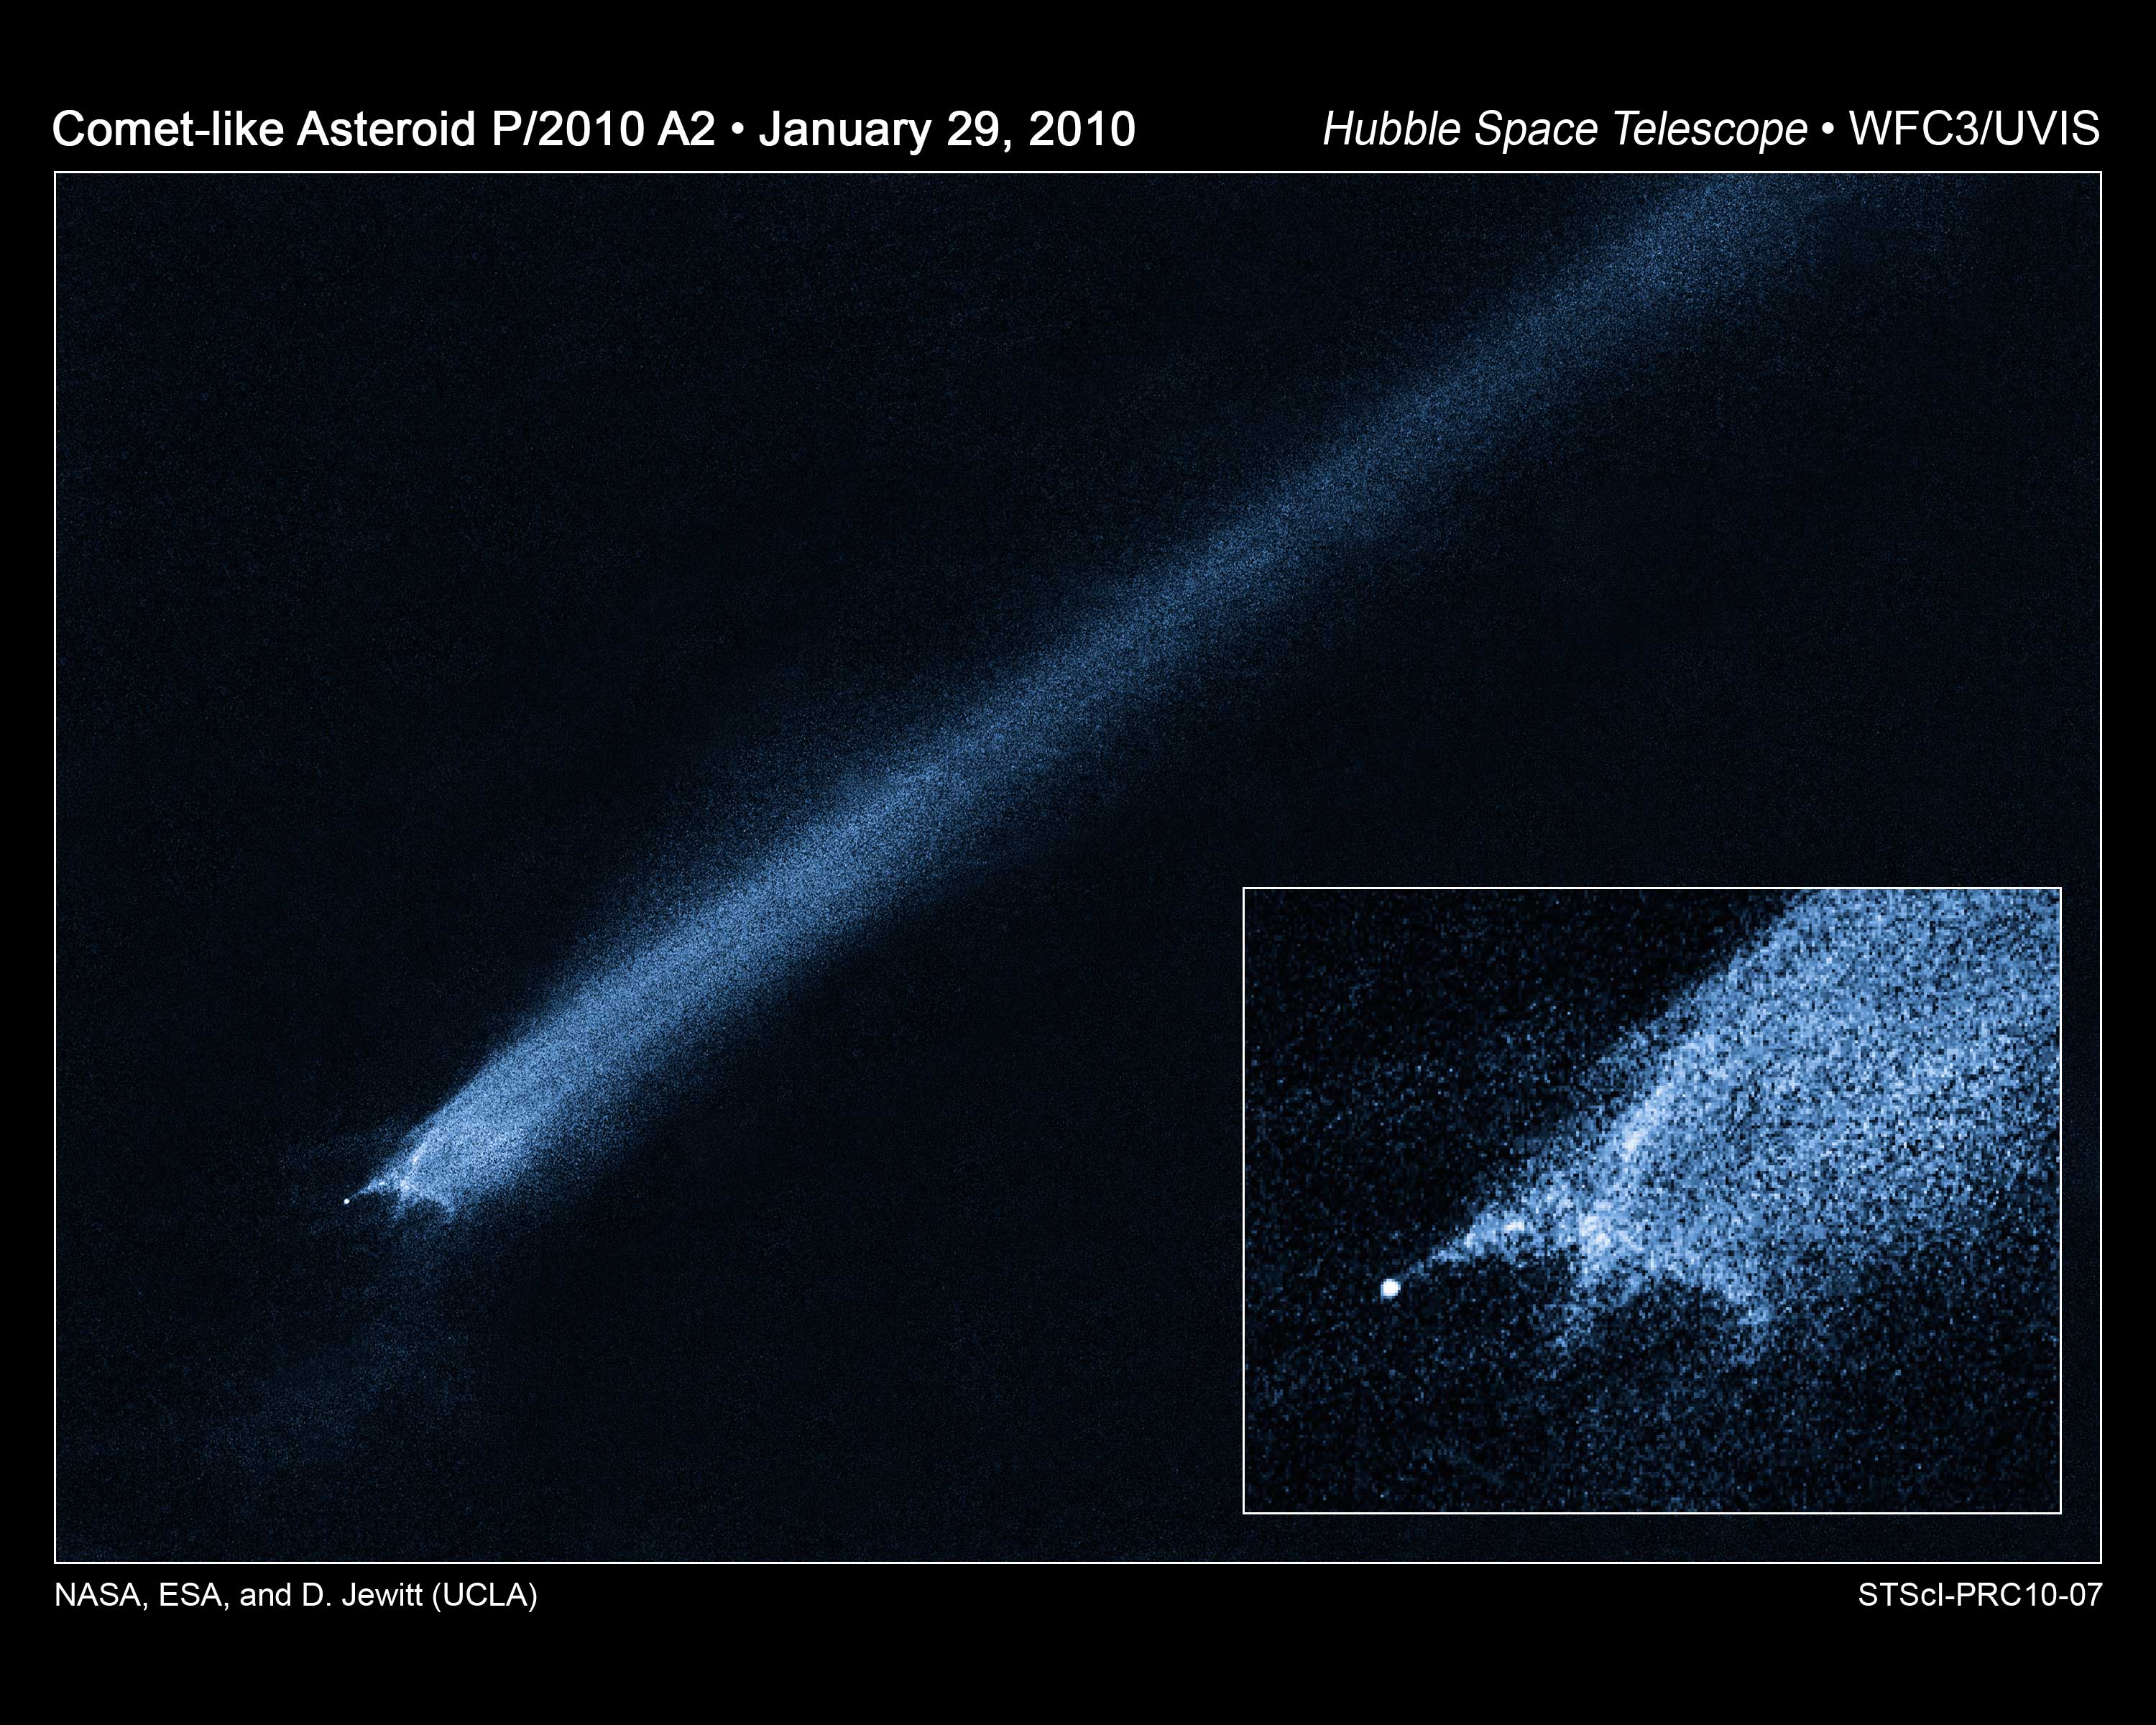 The comet-like object imaged by Hubble, called P/2010 A2, was first discovered by the LINEAR (Lincoln Near-Earth Asteroid Research program) sky survey on January 6. New Hubble images taken on January 25 and 29 show a complex X-pattern of filamentary structures near the nucleus